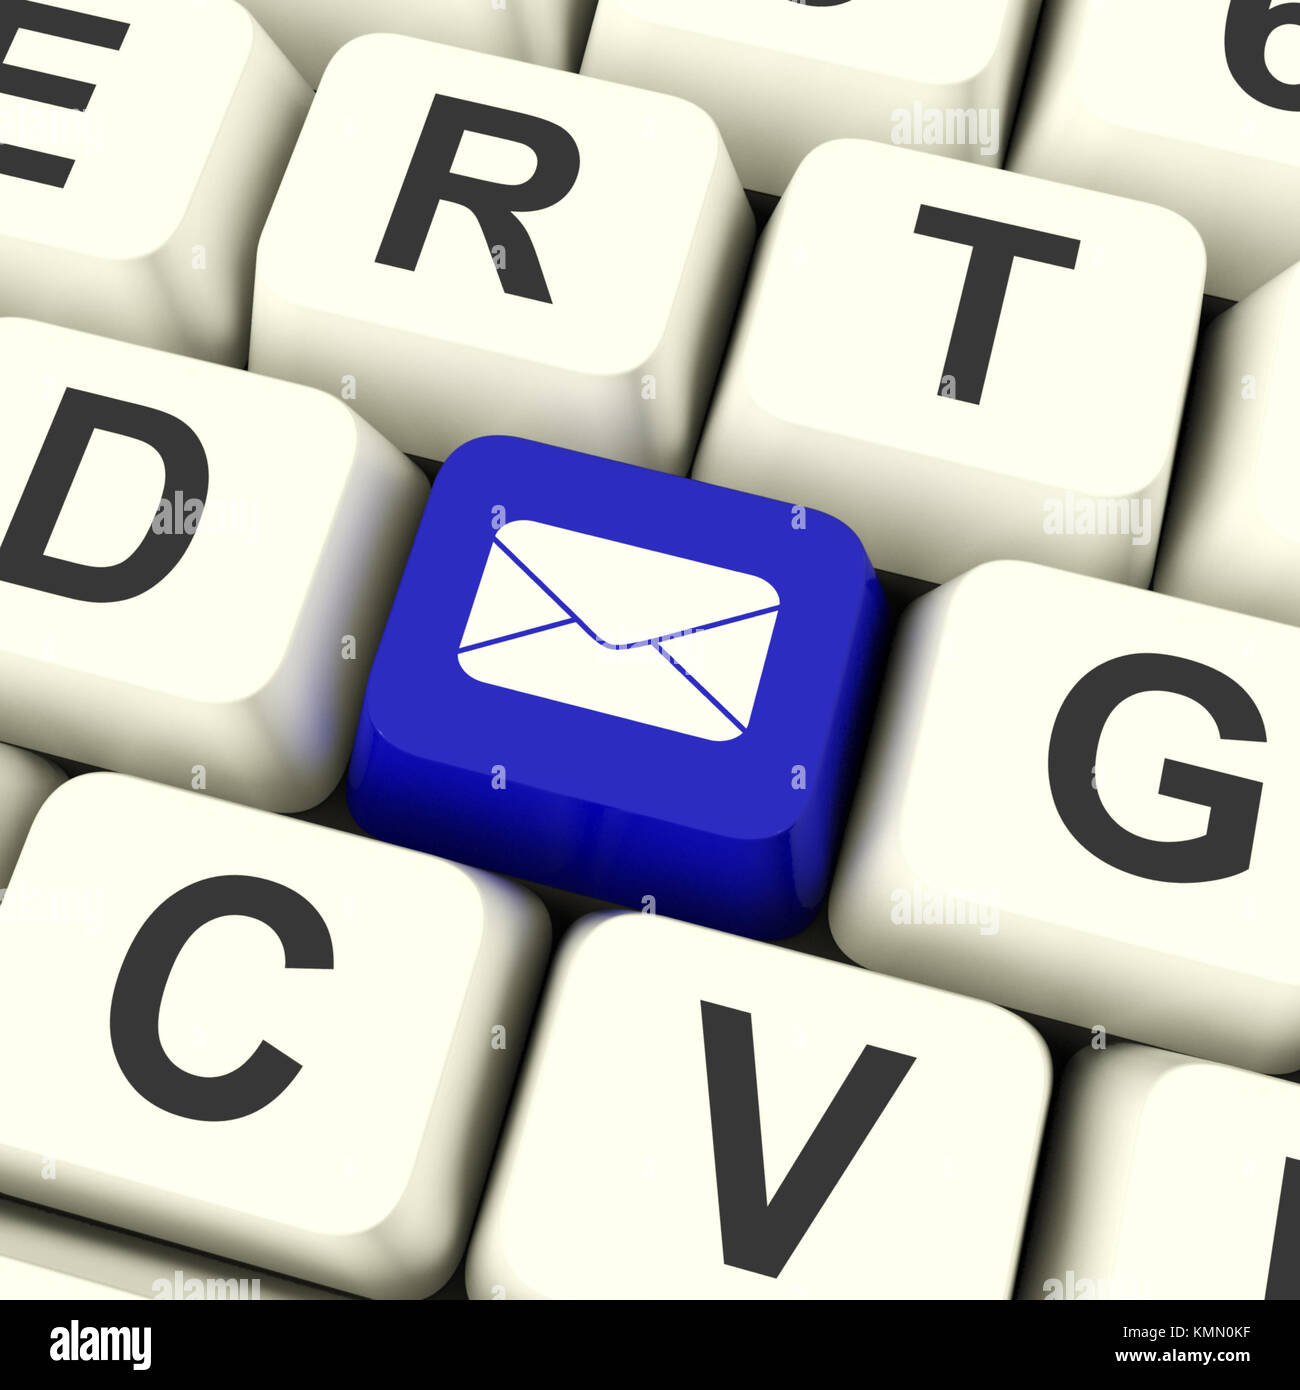 Envelope Computer Key In Blue For Emailing Or Contacting Someone Stock Photo